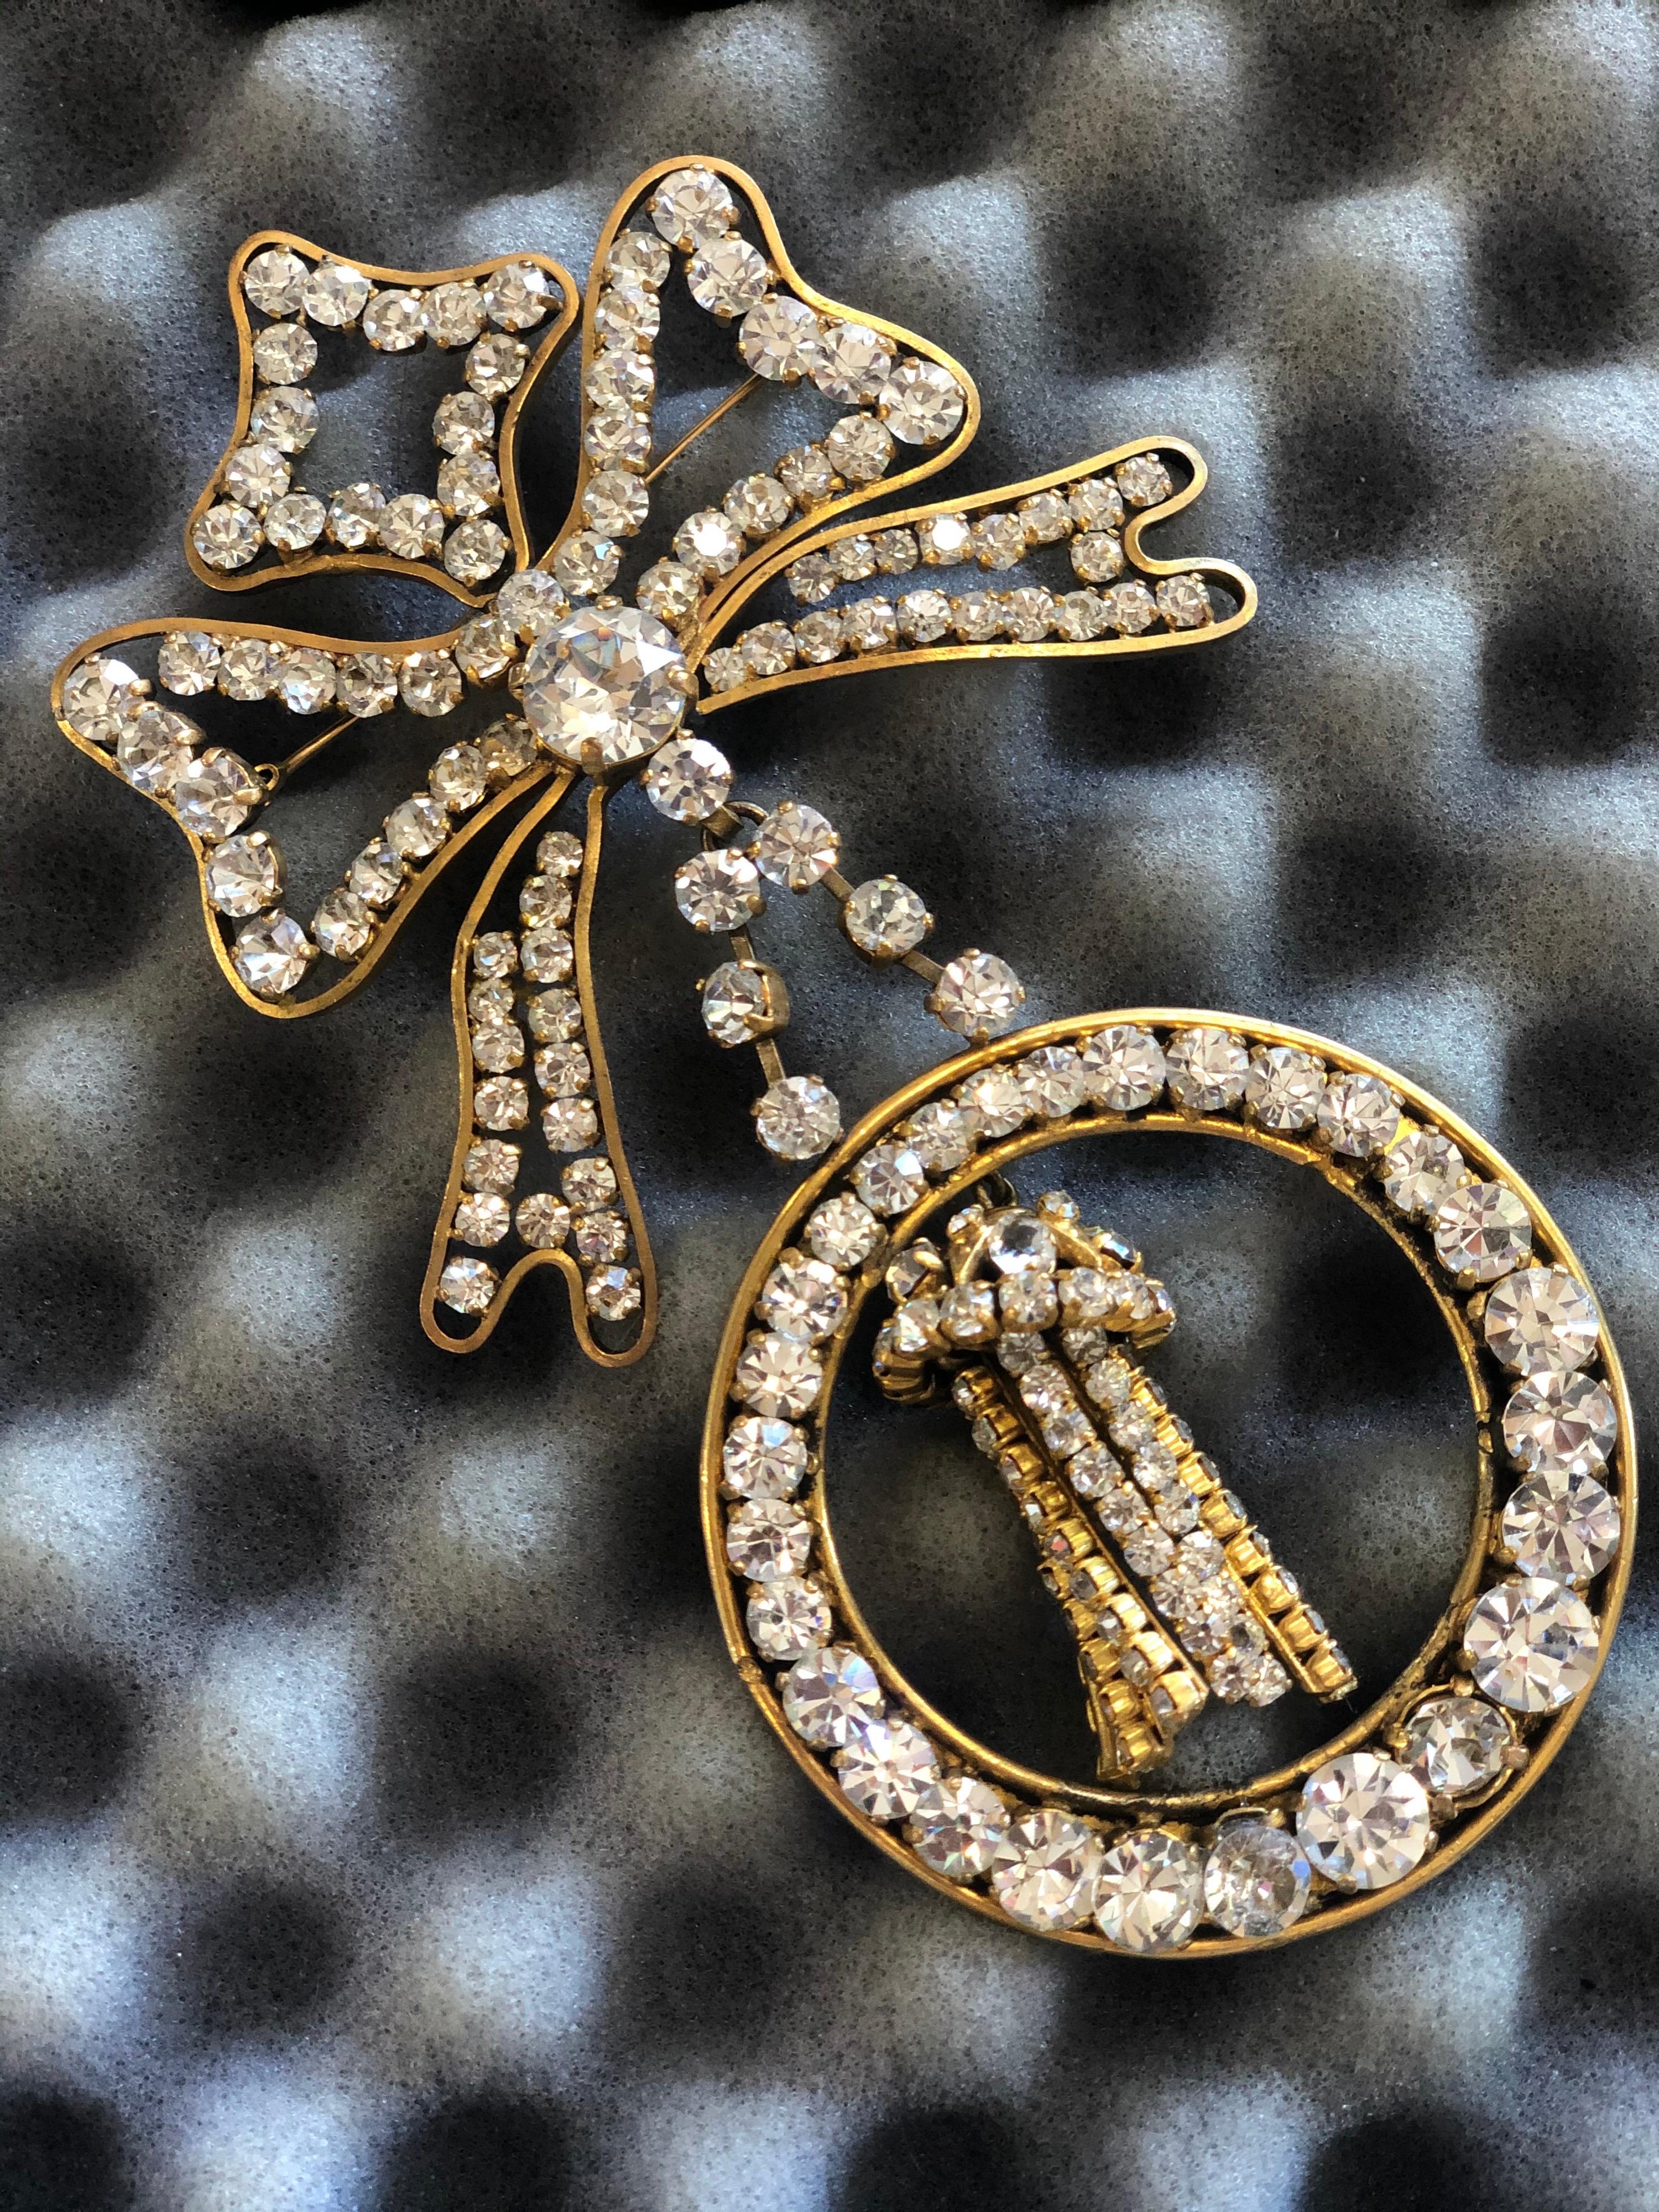 For the Chanel lover who doesn't want the CC's! Circa 1984/1985 and crafted by Victorie de Castellane, this haute couture brooch is from Chanel's 23rd collection. A bow shape with a hanging tassel, this brooch is gold plated and embellished with